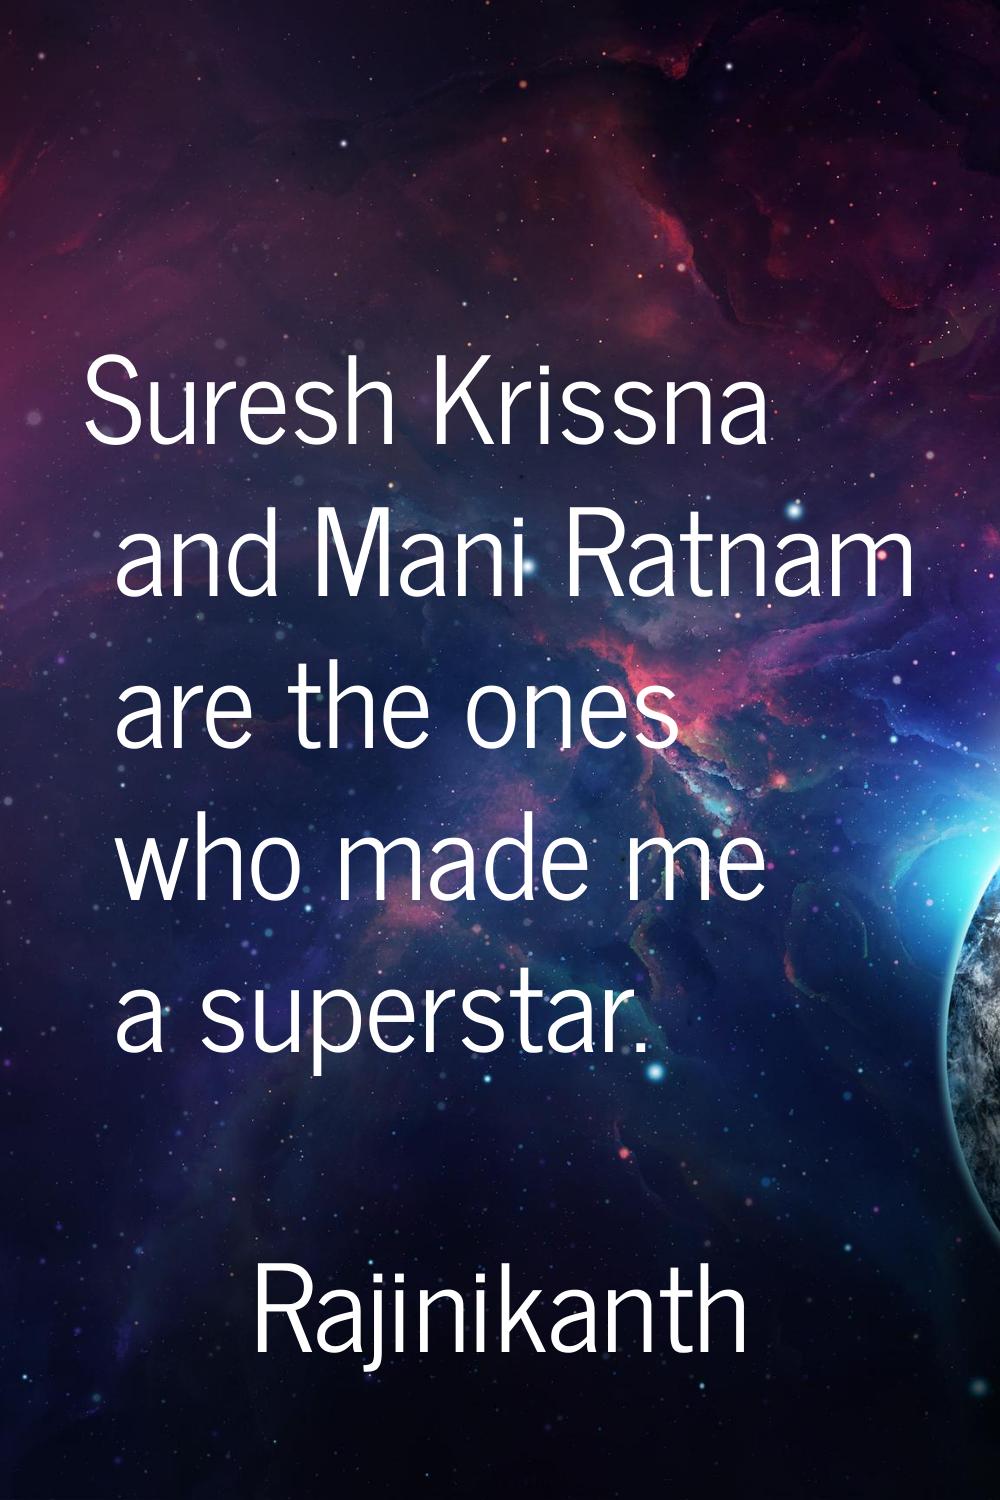 Suresh Krissna and Mani Ratnam are the ones who made me a superstar.